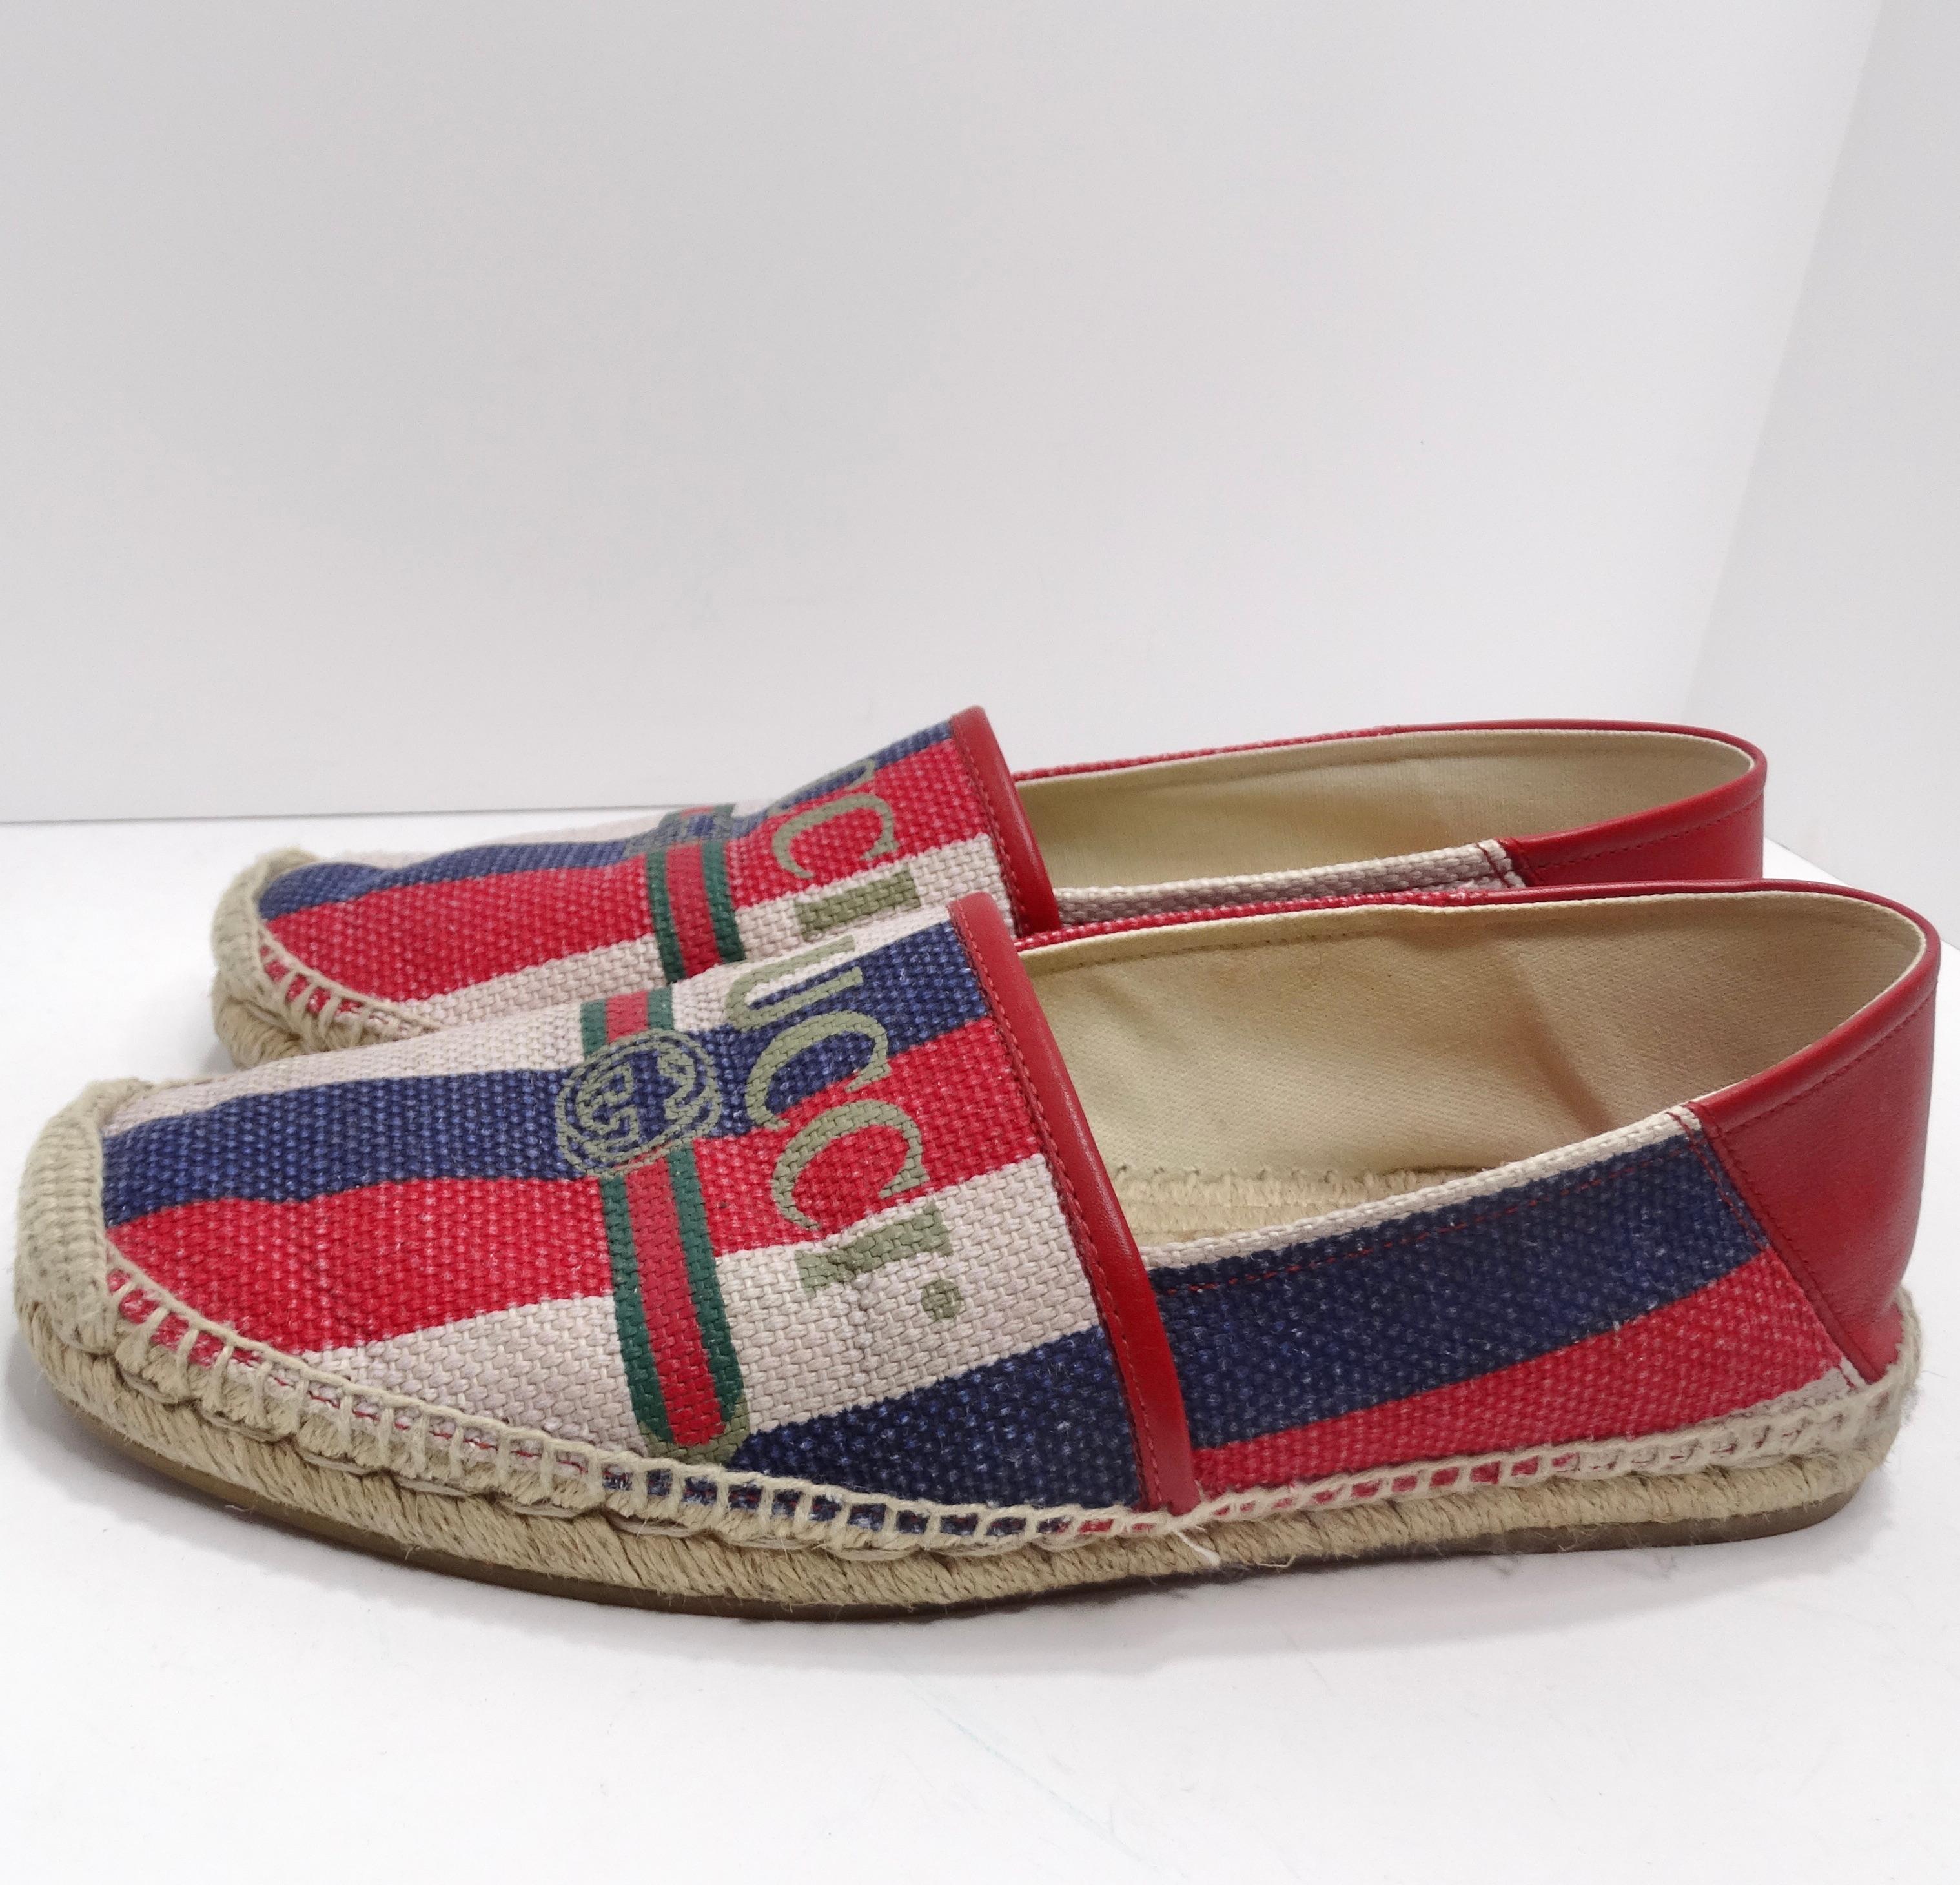 Gucci Sylvie Logo Espadrilles In Good Condition For Sale In Scottsdale, AZ